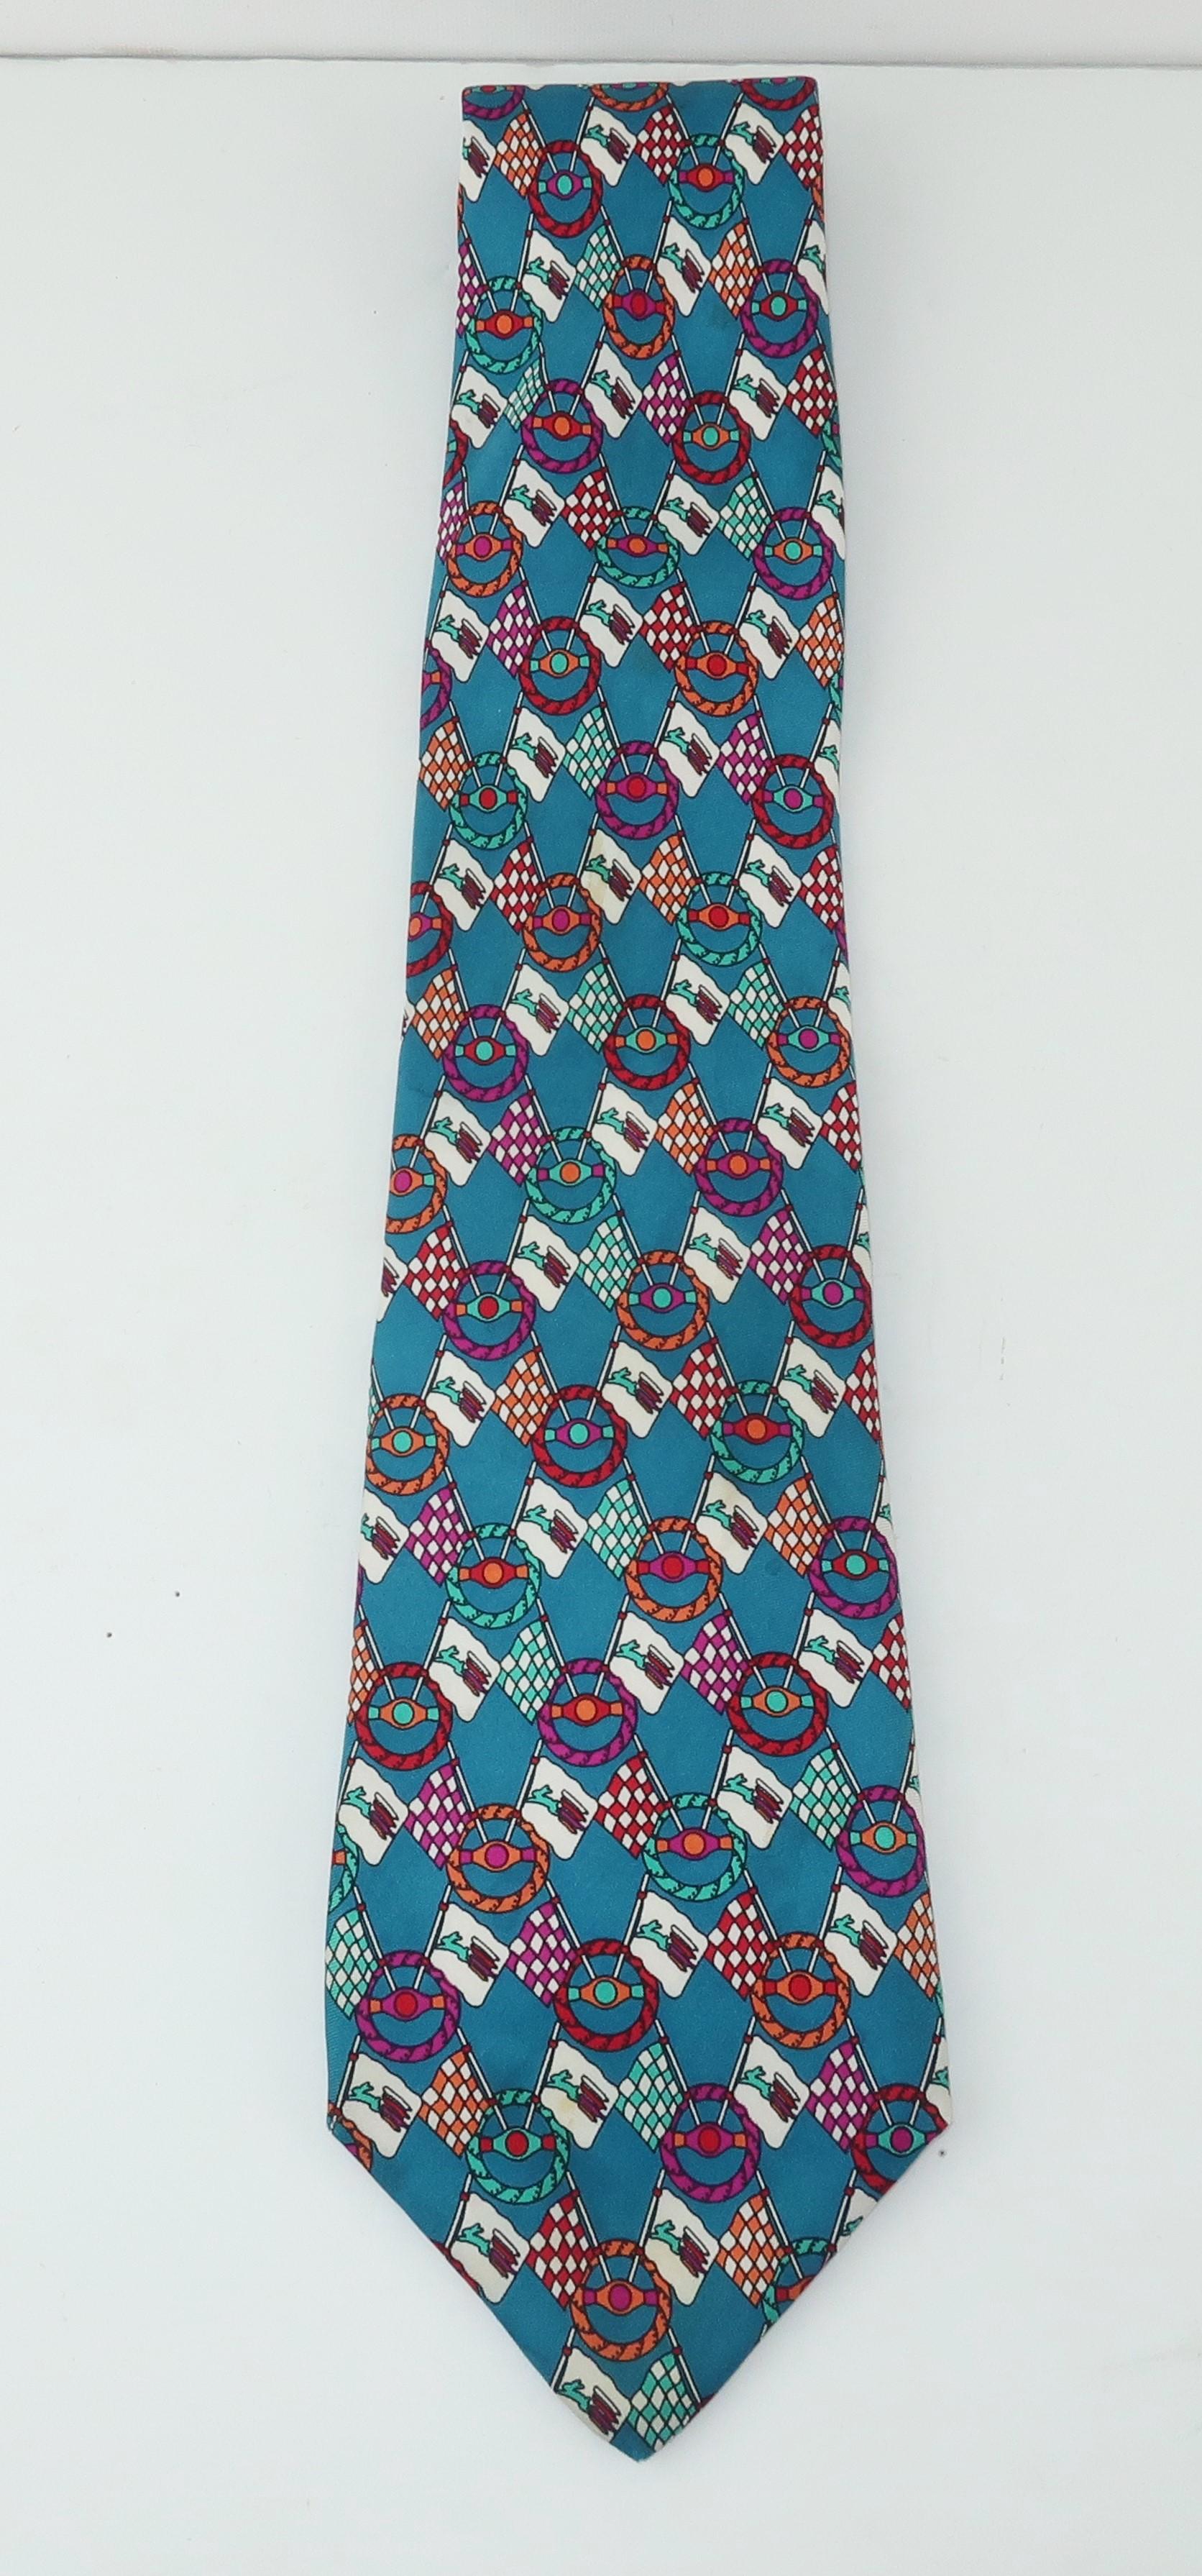 Fendi creates a colorful men’s silk necktie with a racing flag and steering wheel motif.  White, fuchsia, red, aqua and orange pop off of a brilliant blue background.  Fair previously owned condition with some subtle discolorations shown in